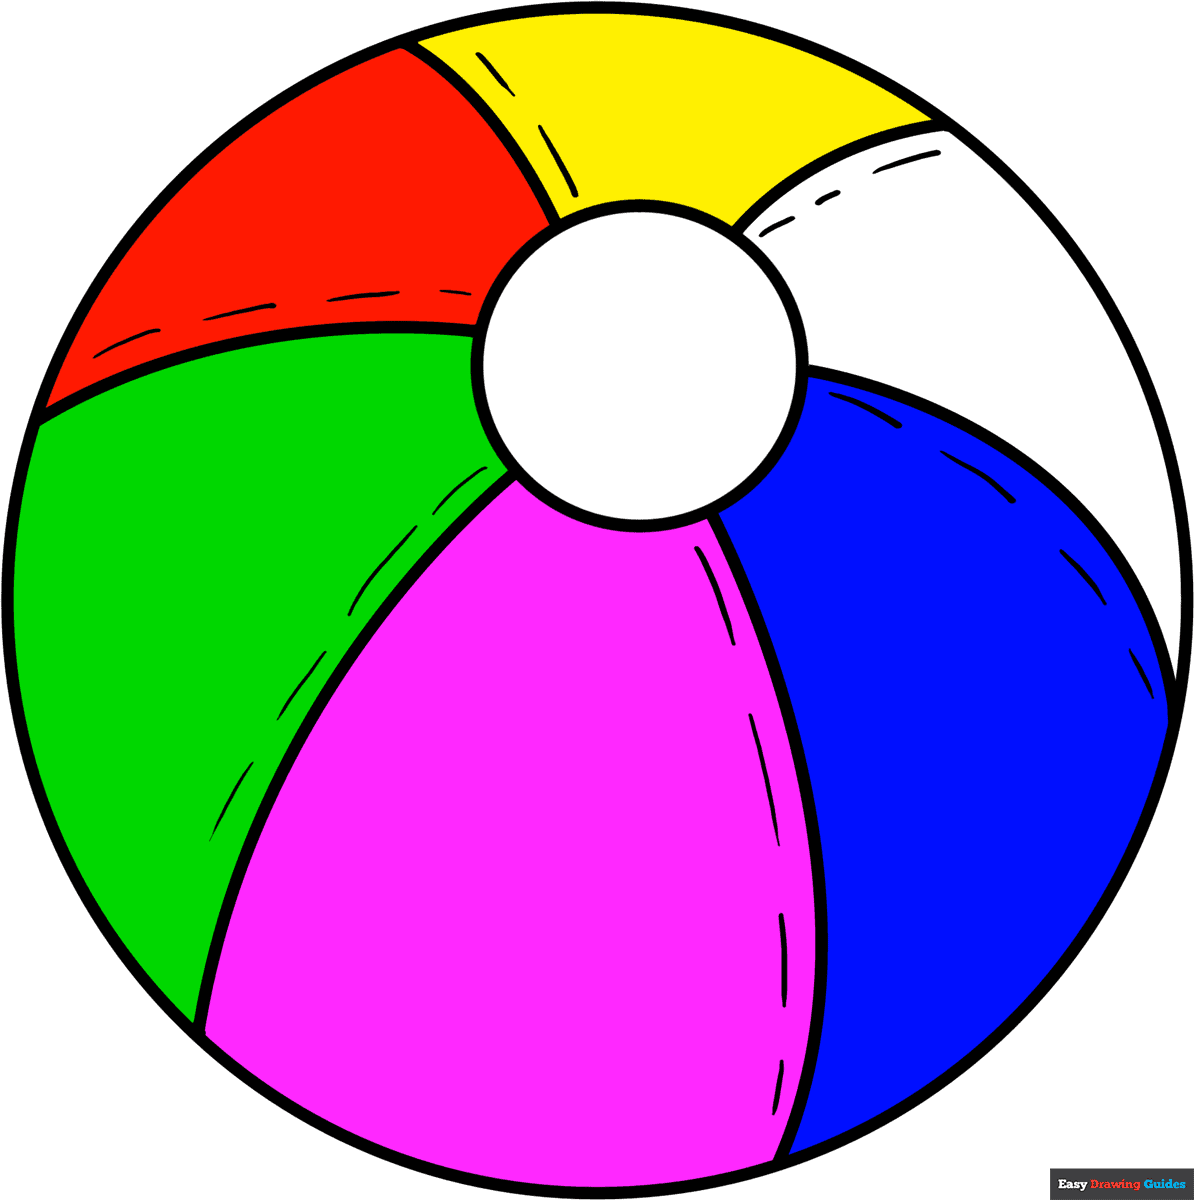 How to draw a beach ball